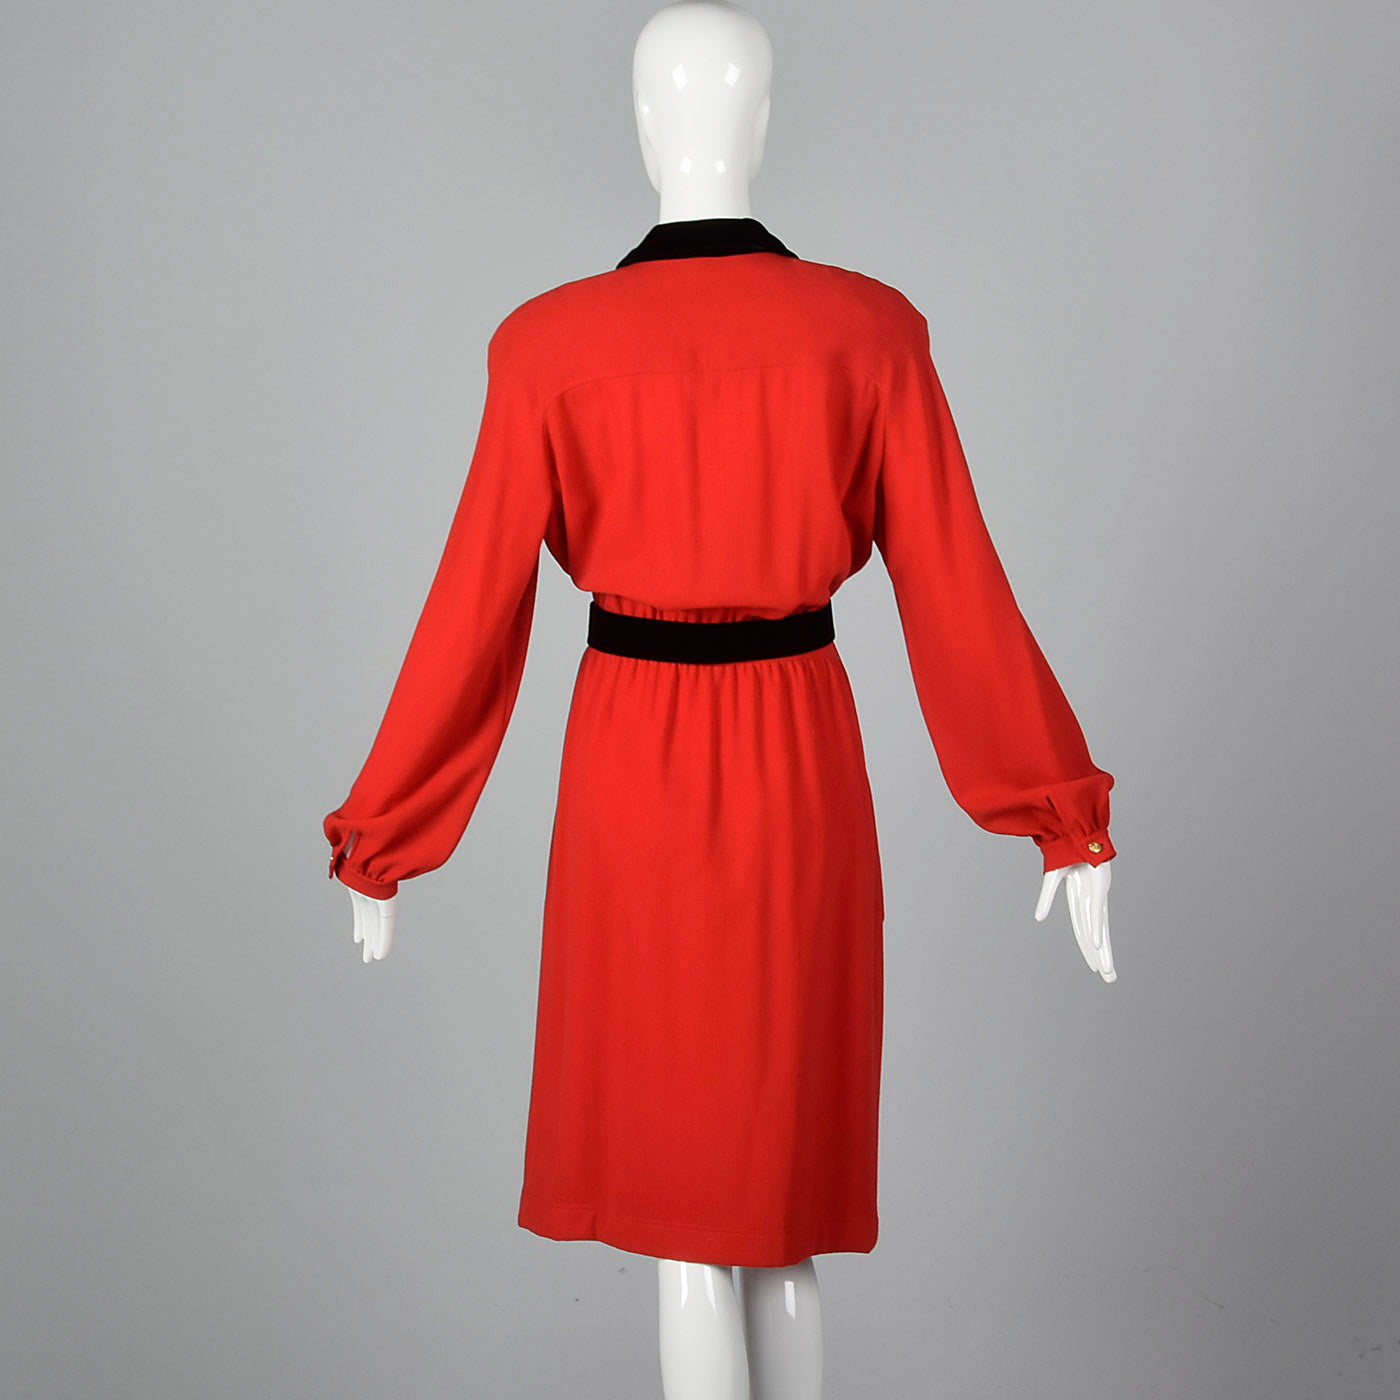 1980s Valentino Boutique Red Dress with Black Trim